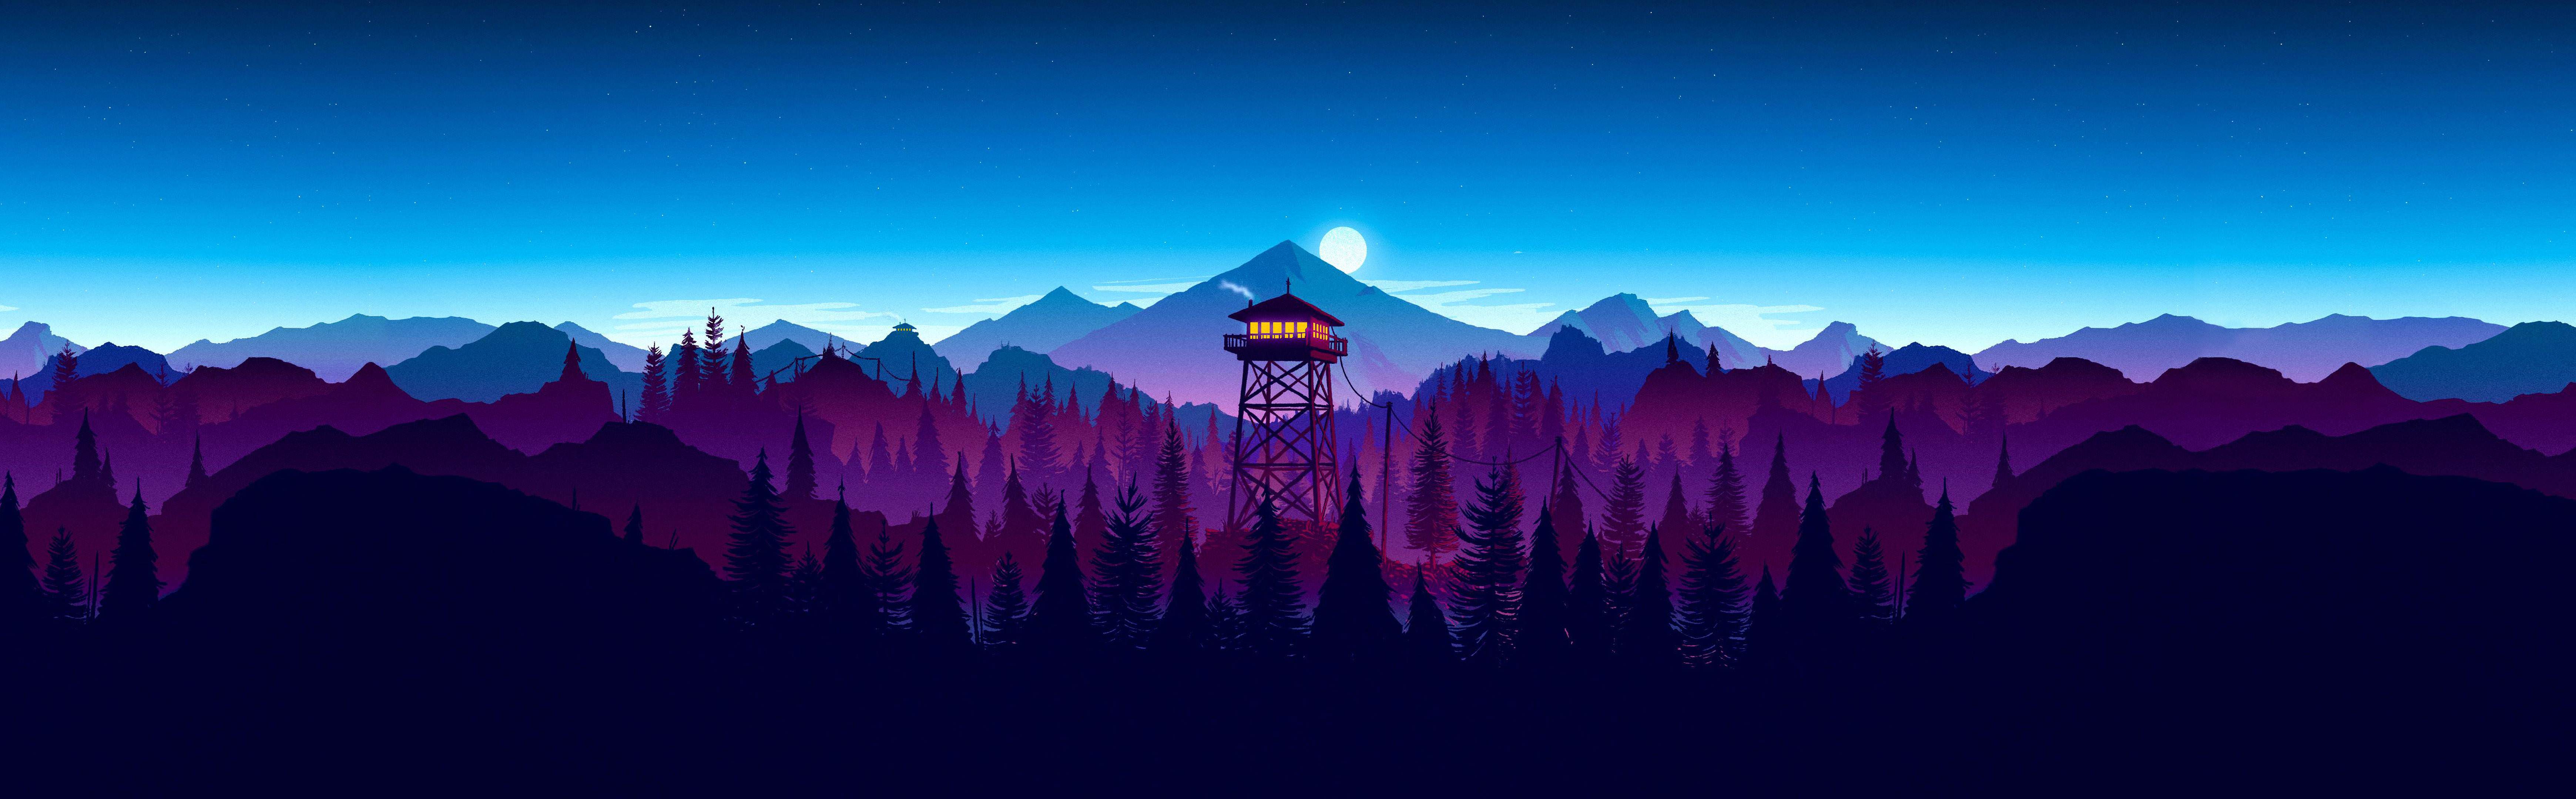 Has Anyone 7680x2106 wallpaper? I have 2 4k monitors, and I can't find a single image of that size. In the meanwhile a nice image of firewatch for you guys [6960x2160]